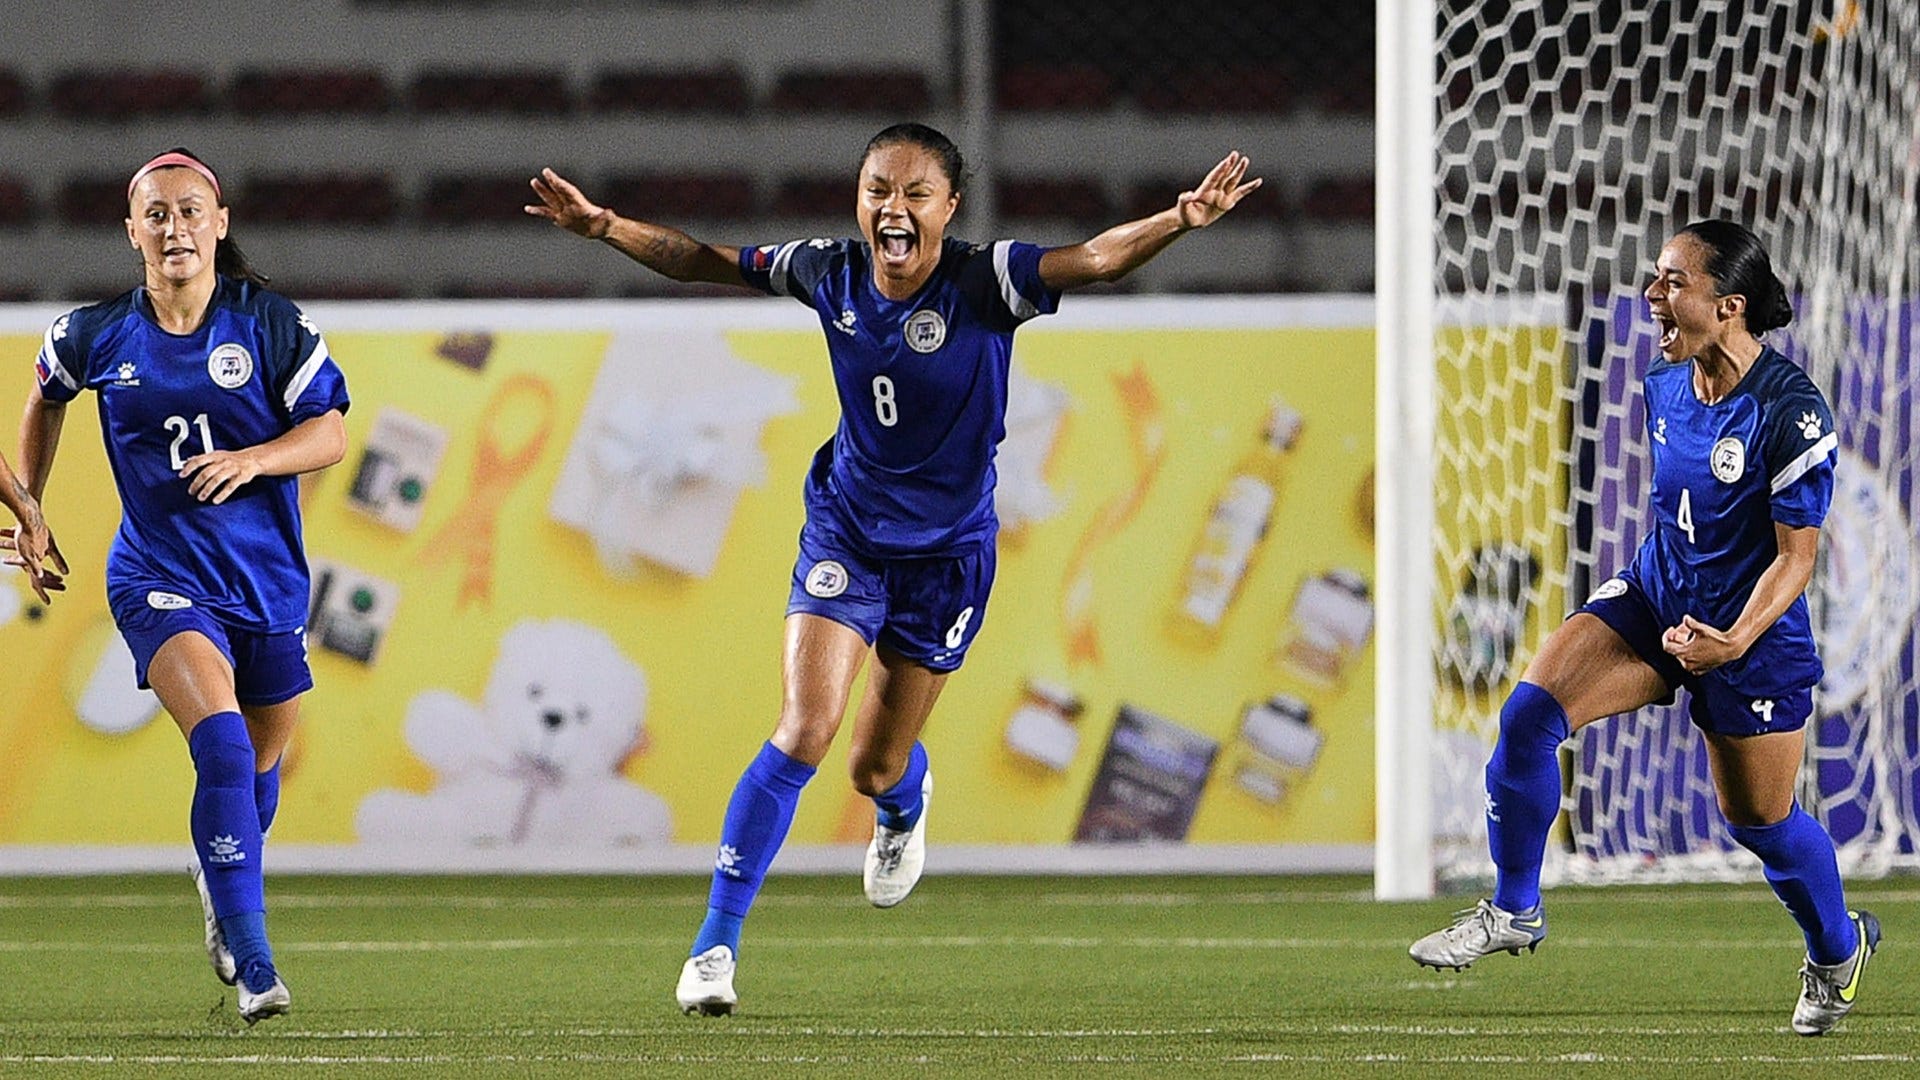 Philippines Women vs Switzerland Women Live stream, TV channel, kick-off time and where to watch Goal US